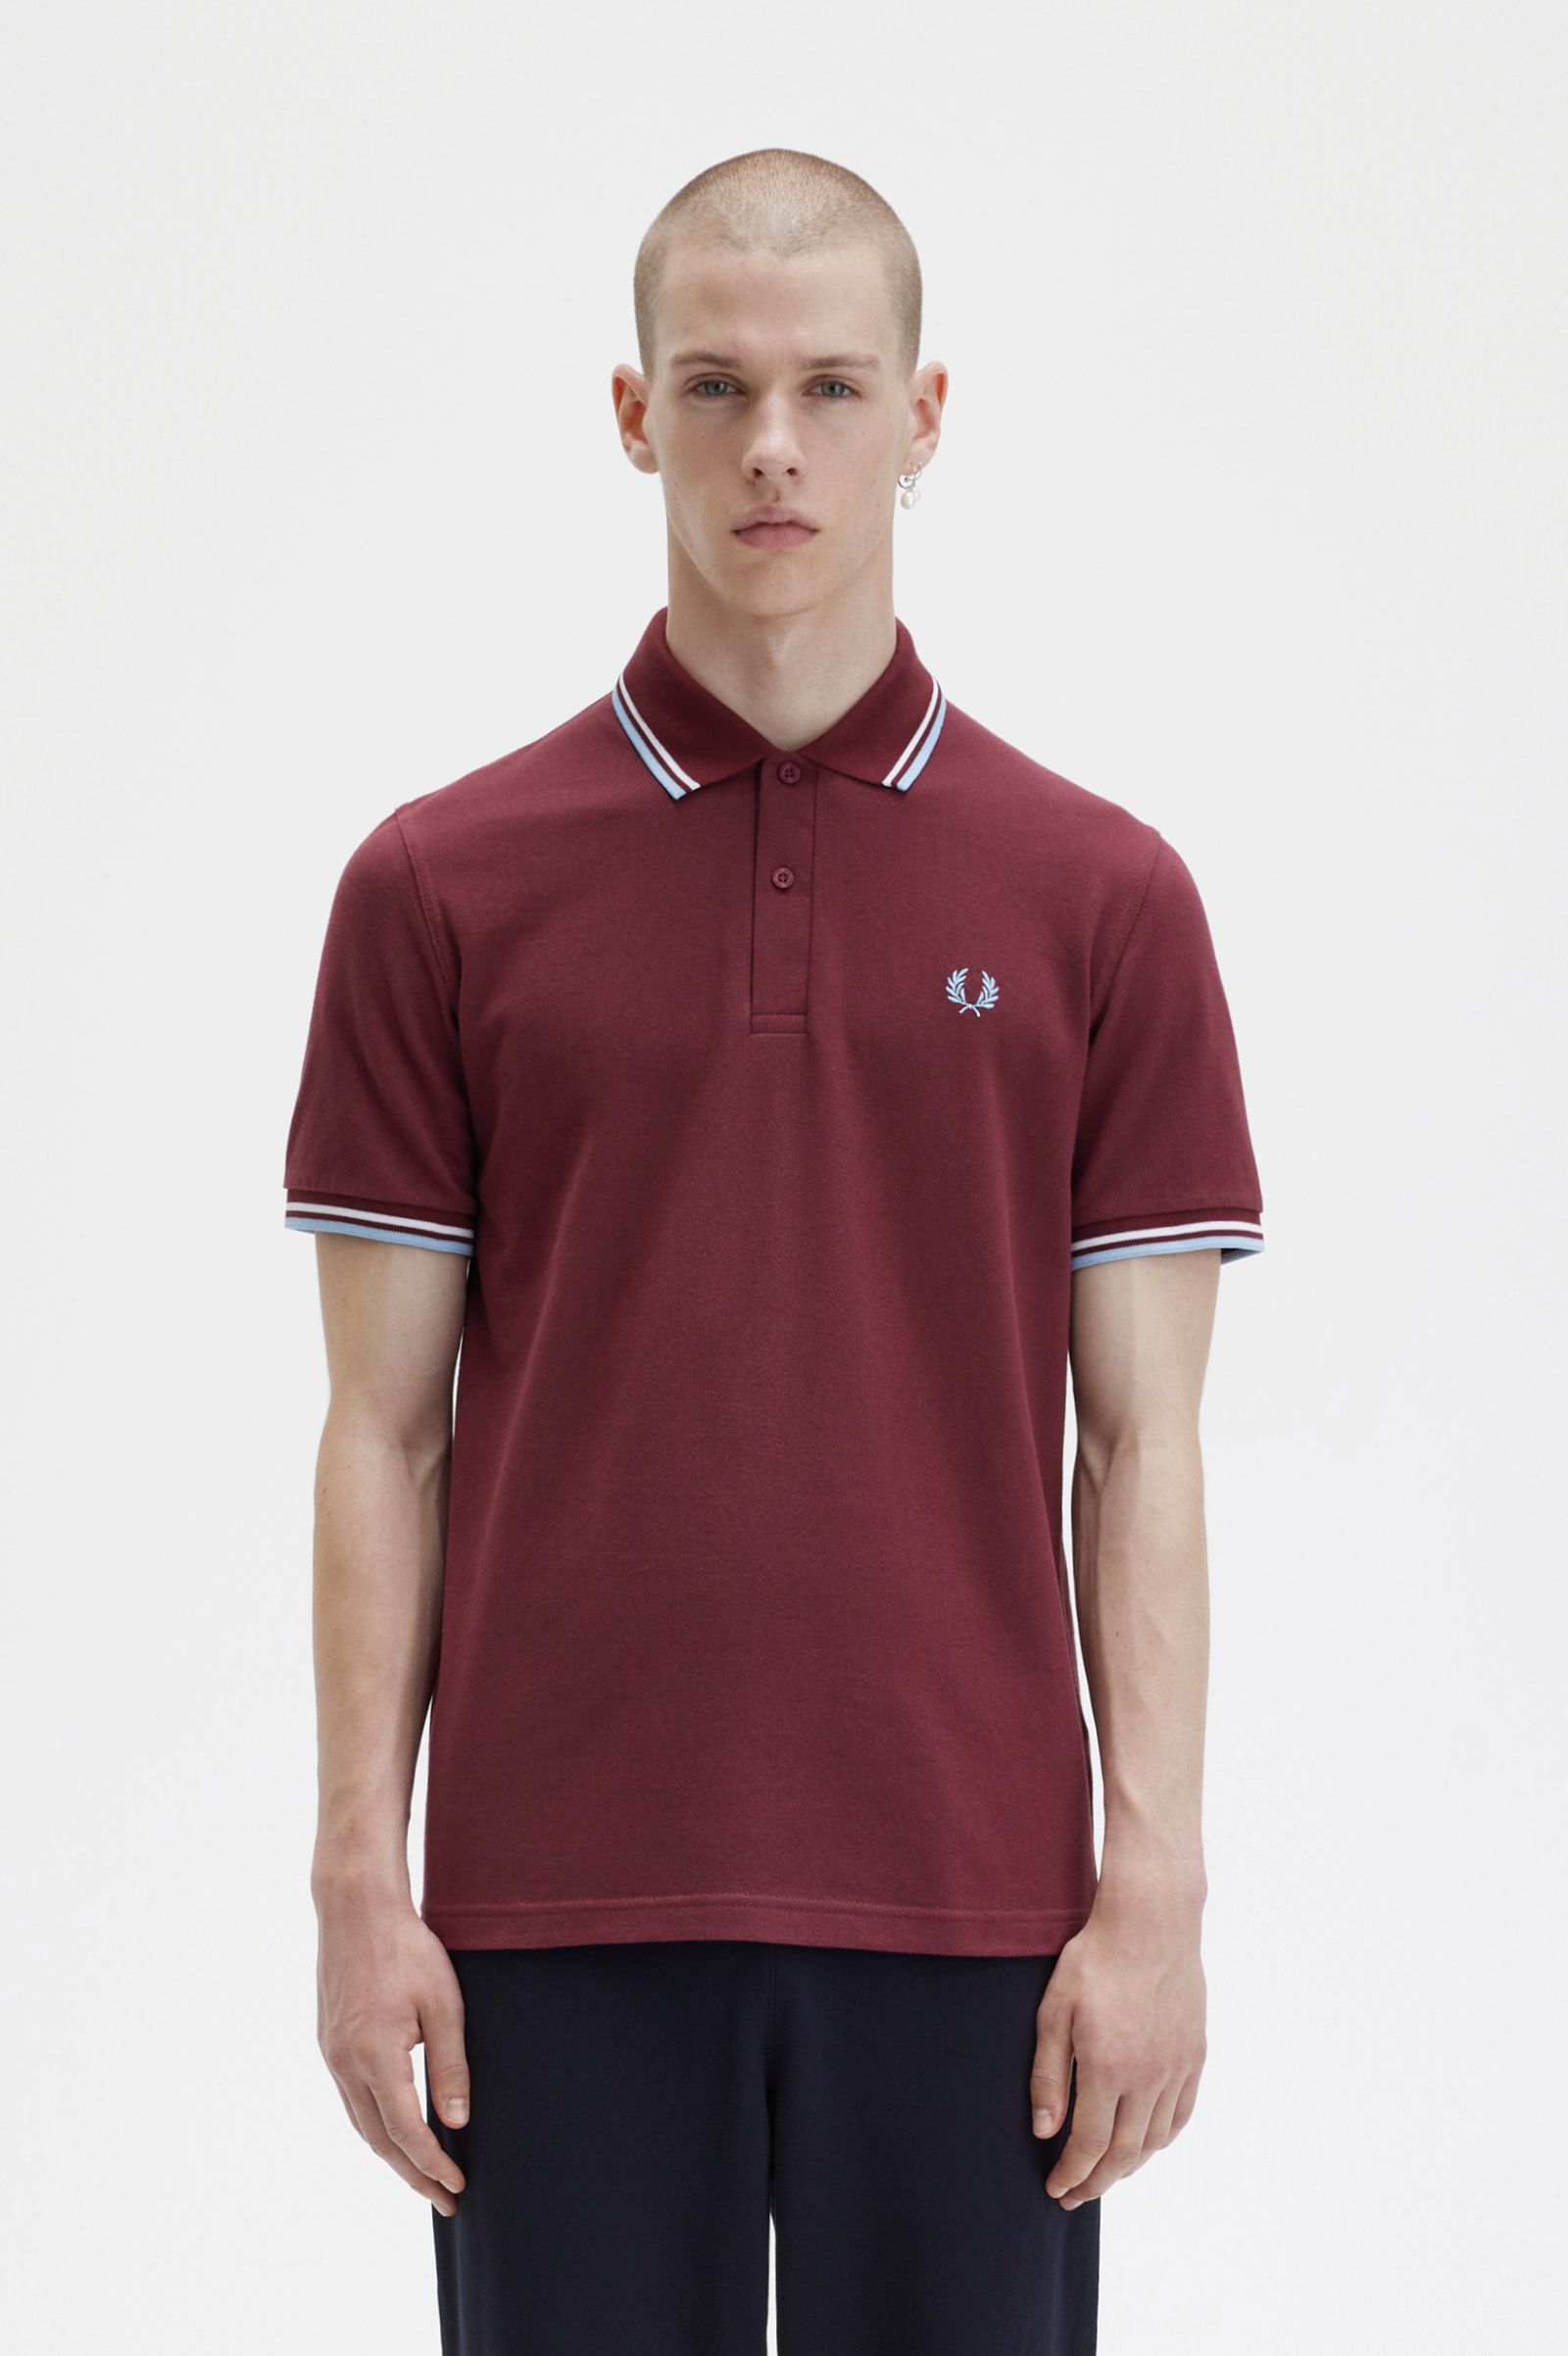 M12 - Maroon / White / Ice | The Fred Perry Shirt | Men's Short & Long Sleeve Polo Shirts | Perry US